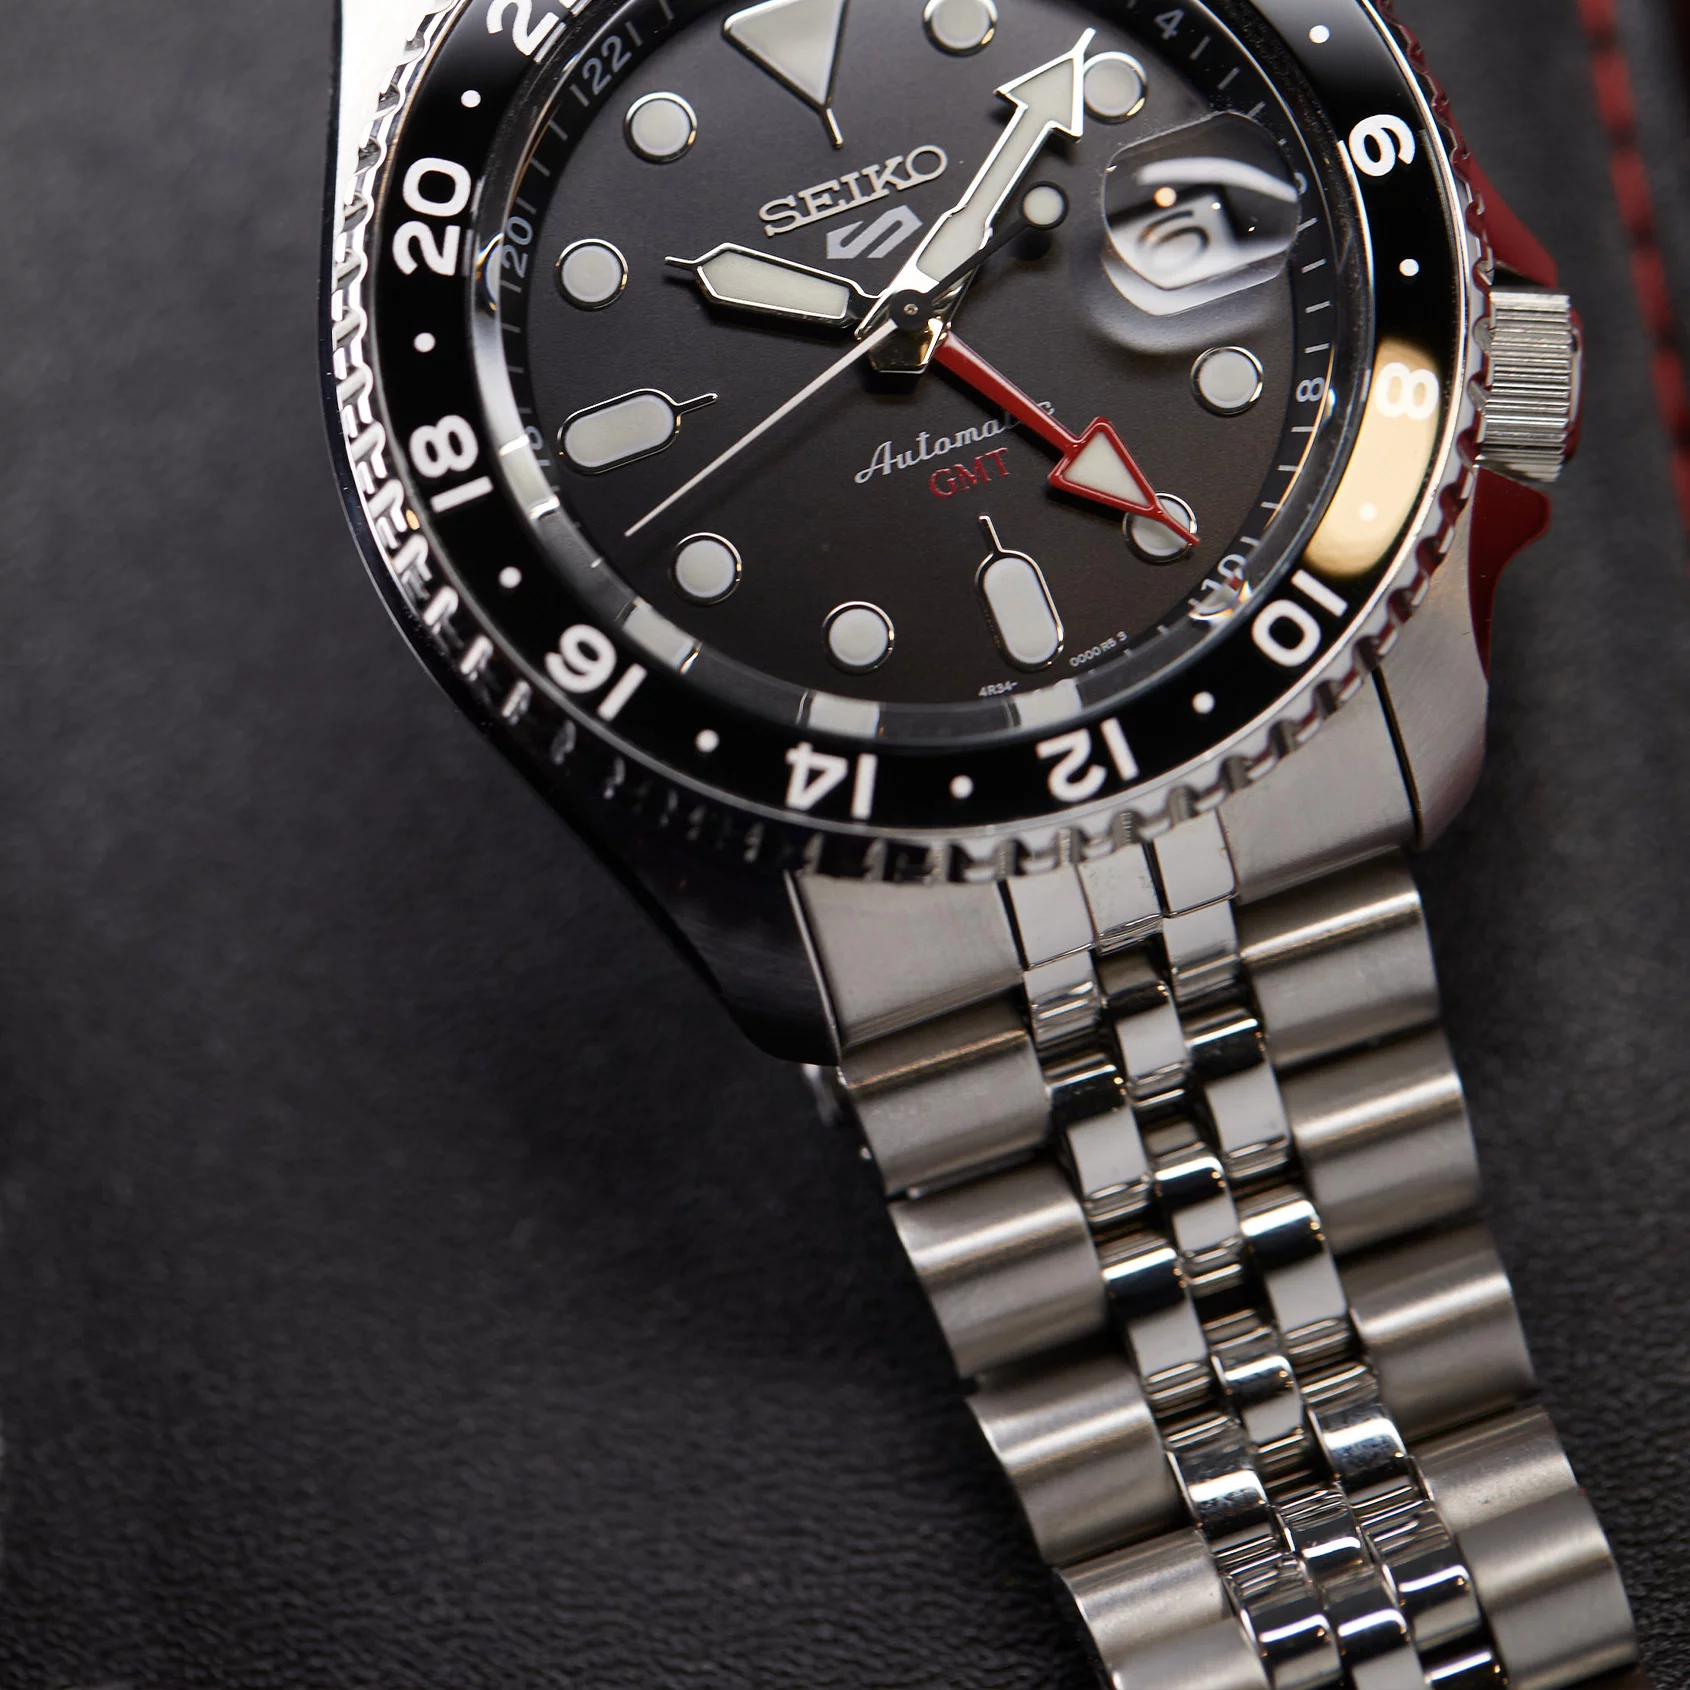 HANDS-ON: The Seiko 5 SKX Sports Style GMT